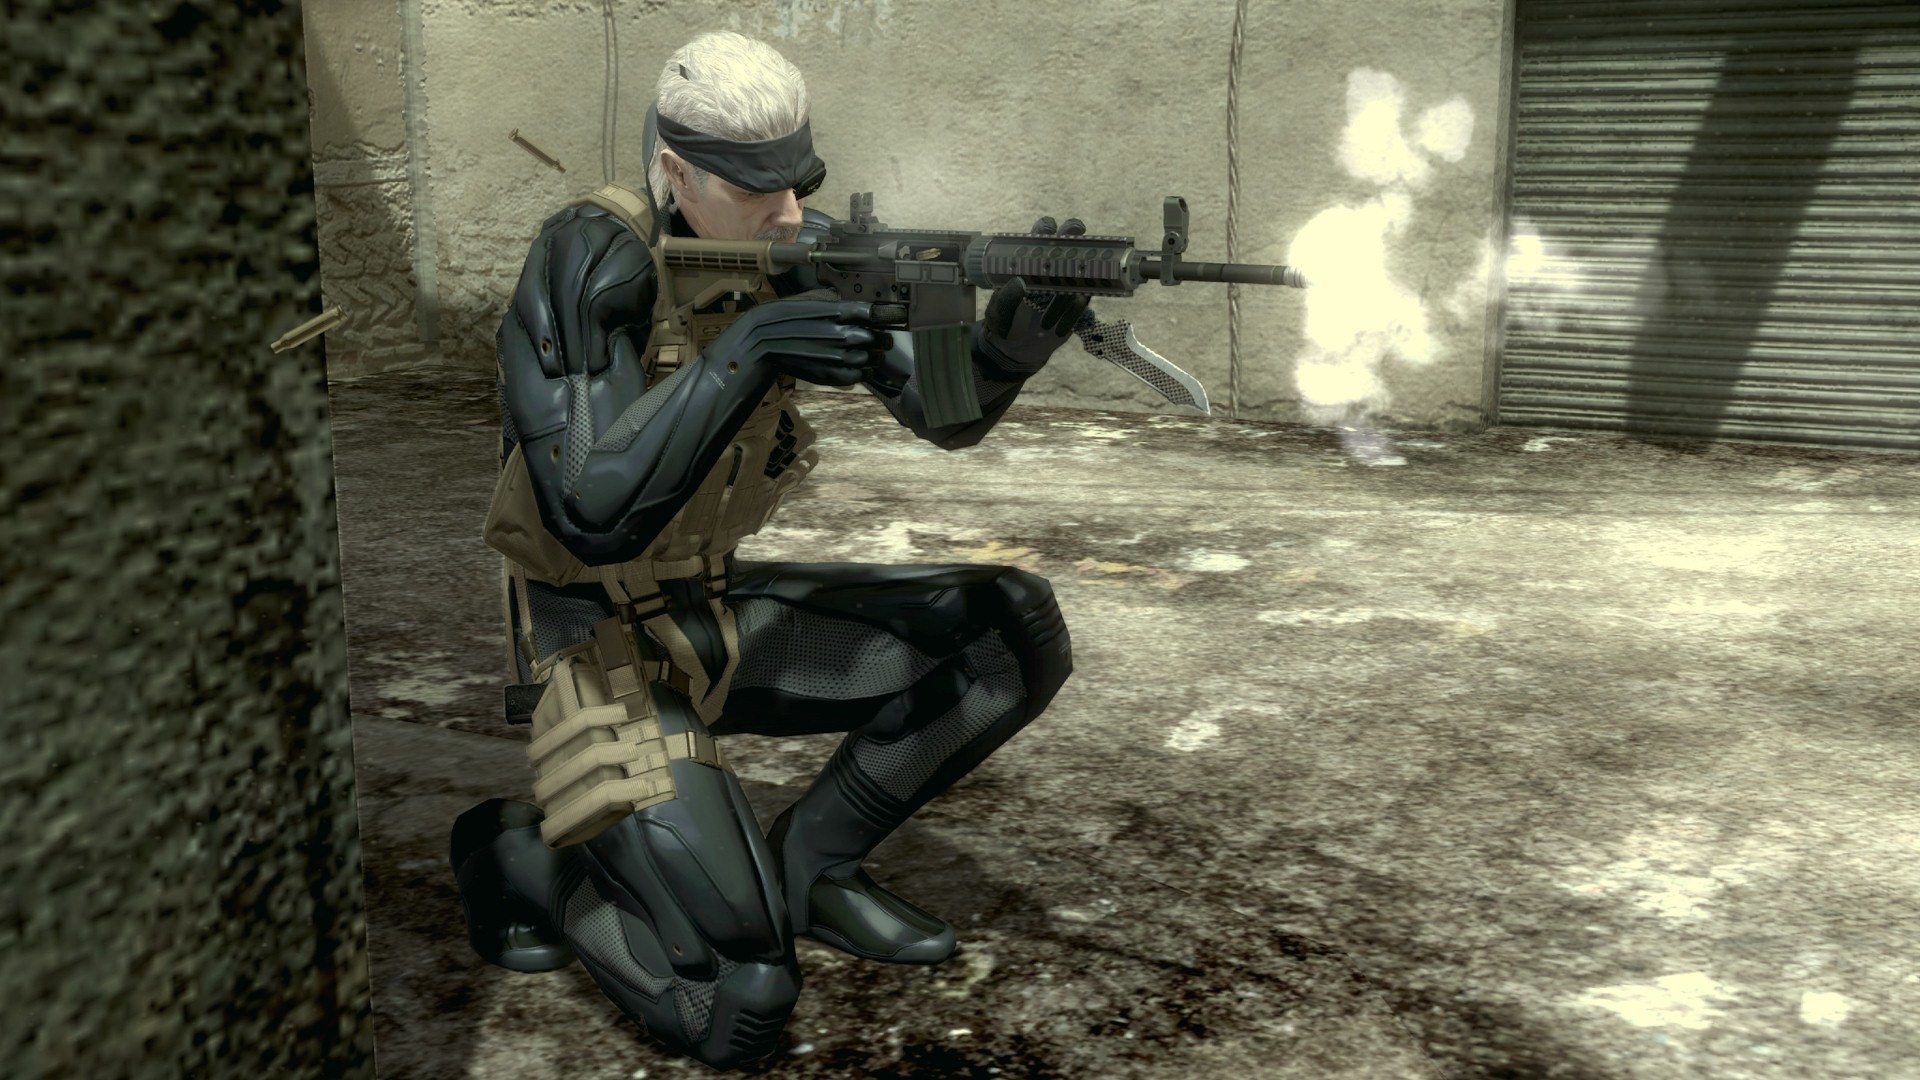 1920x1080 The prospect of a Metal Gear film has been doing the rounds in the rumor  mill for a good few years now, suffering from a likely dose of production  hell and ...